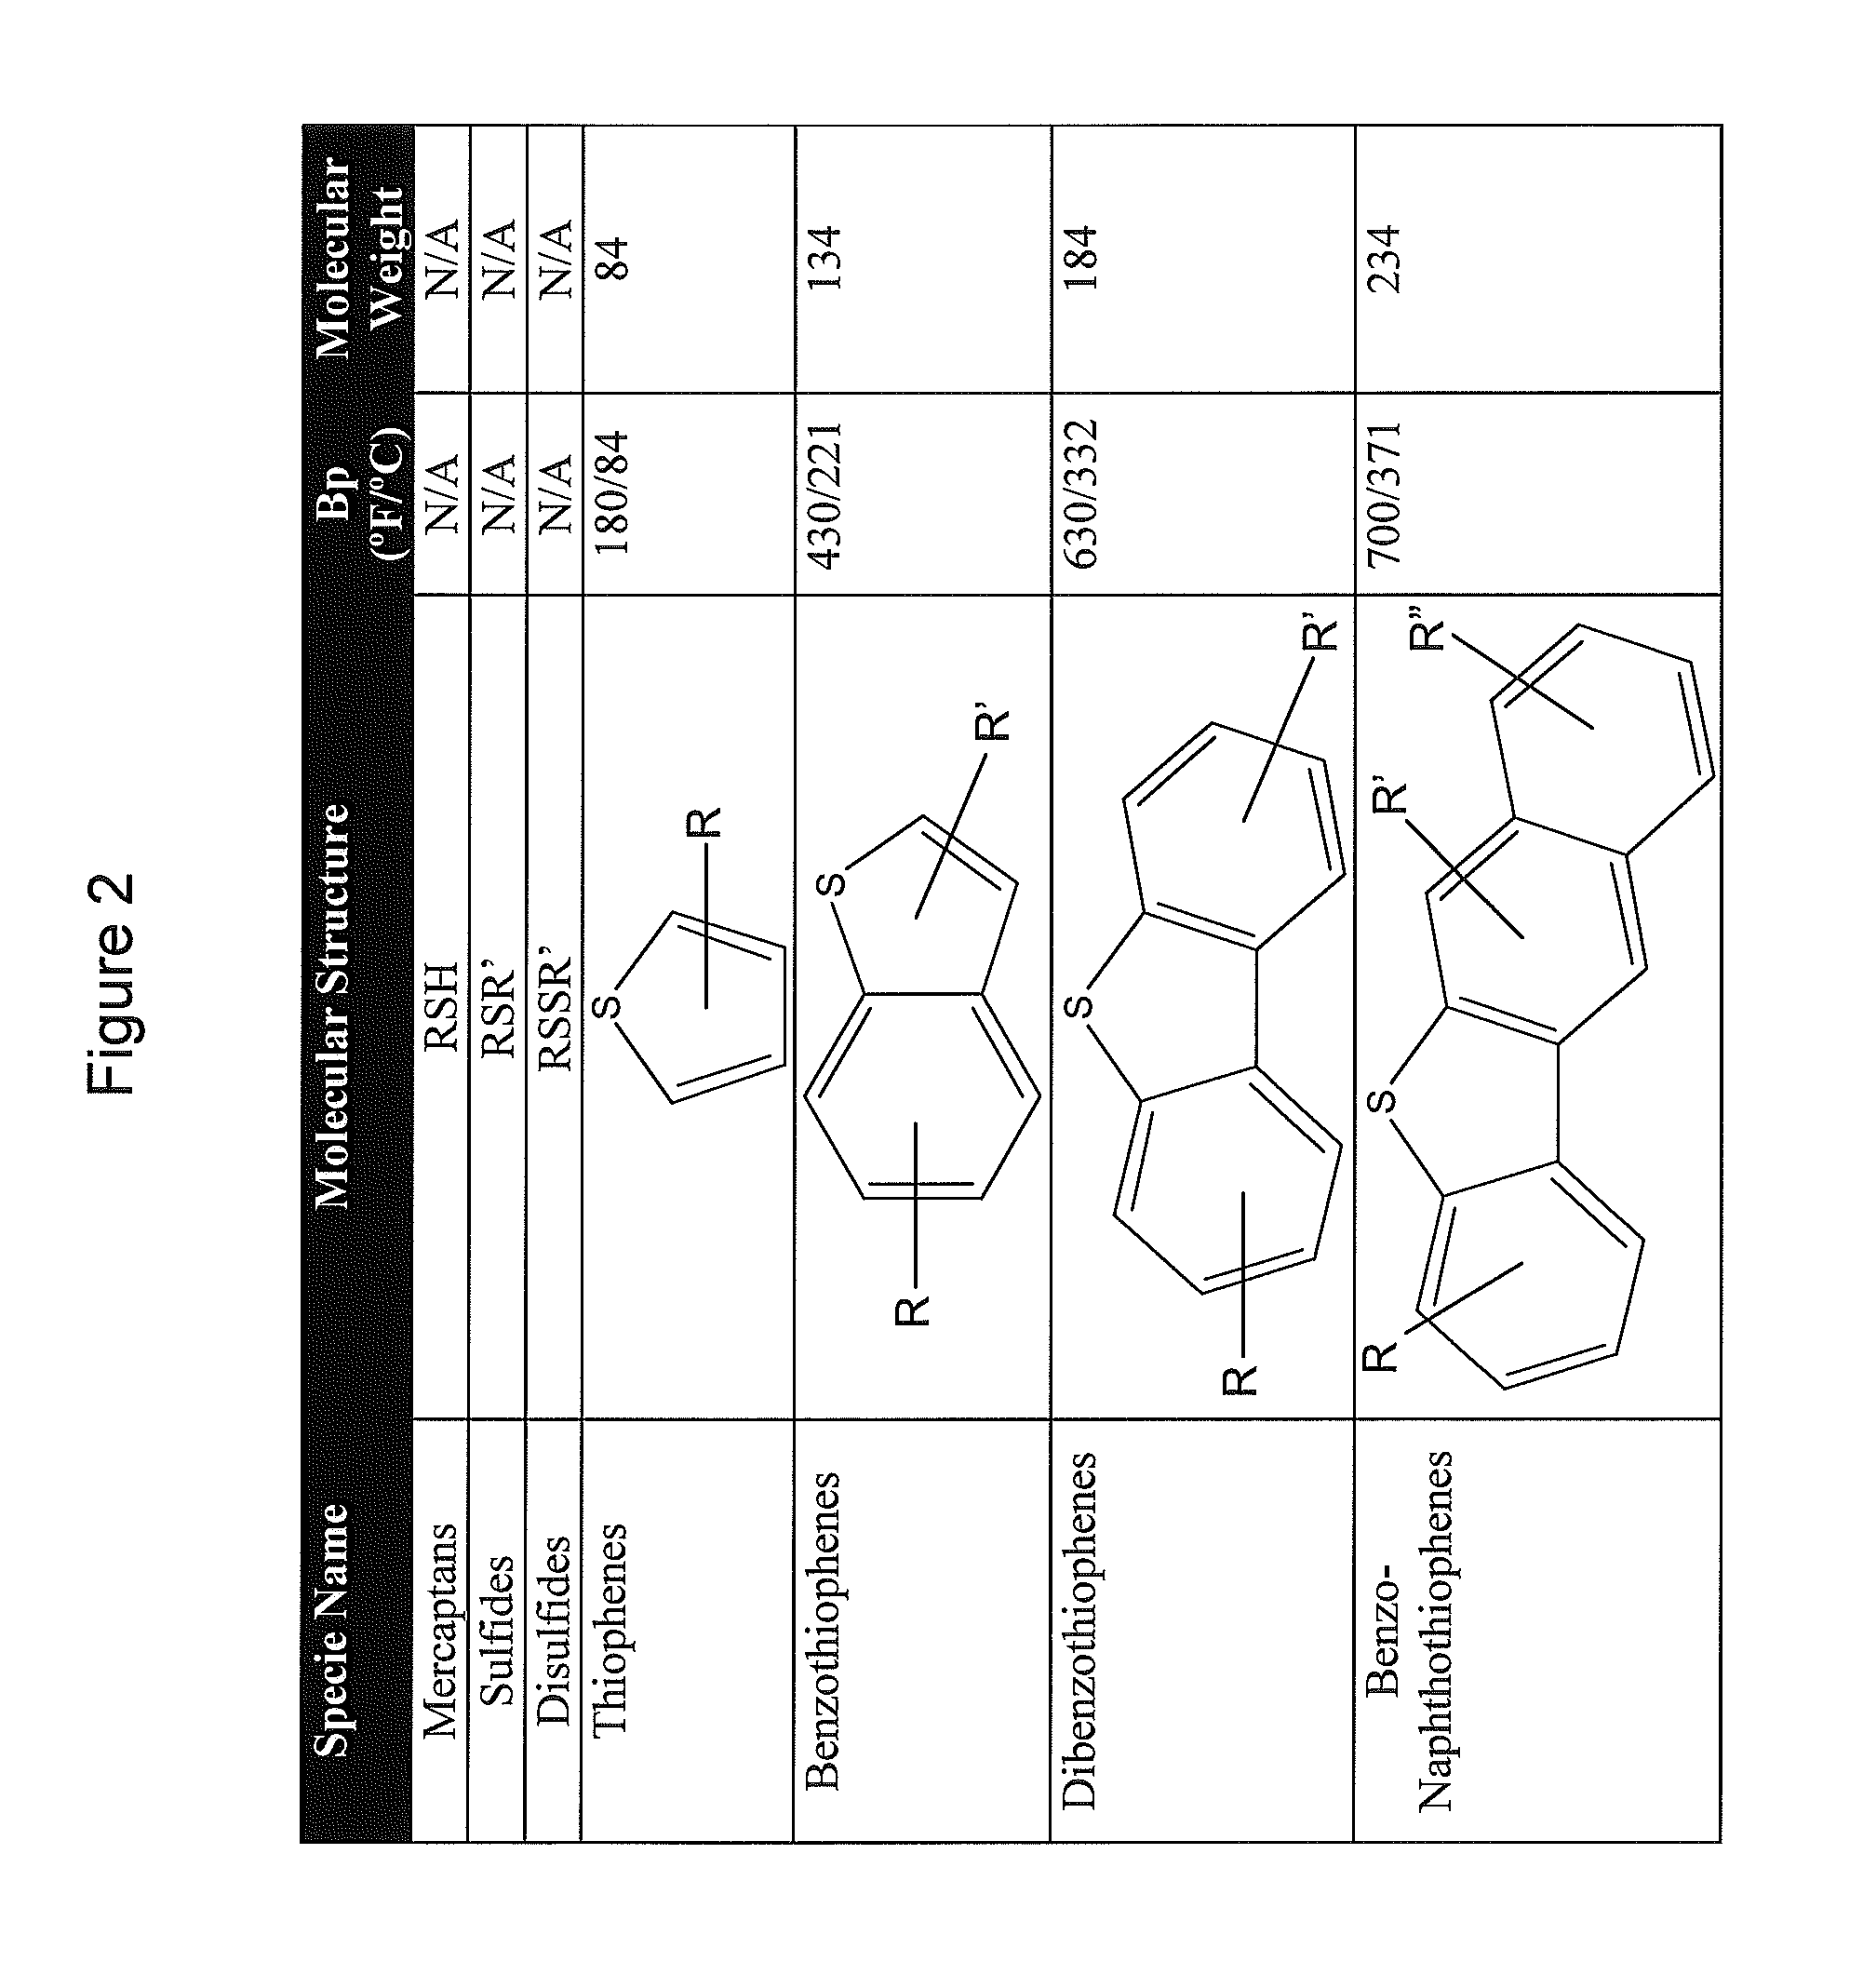 Sulfoxidation catalysts and methods and systems of using same